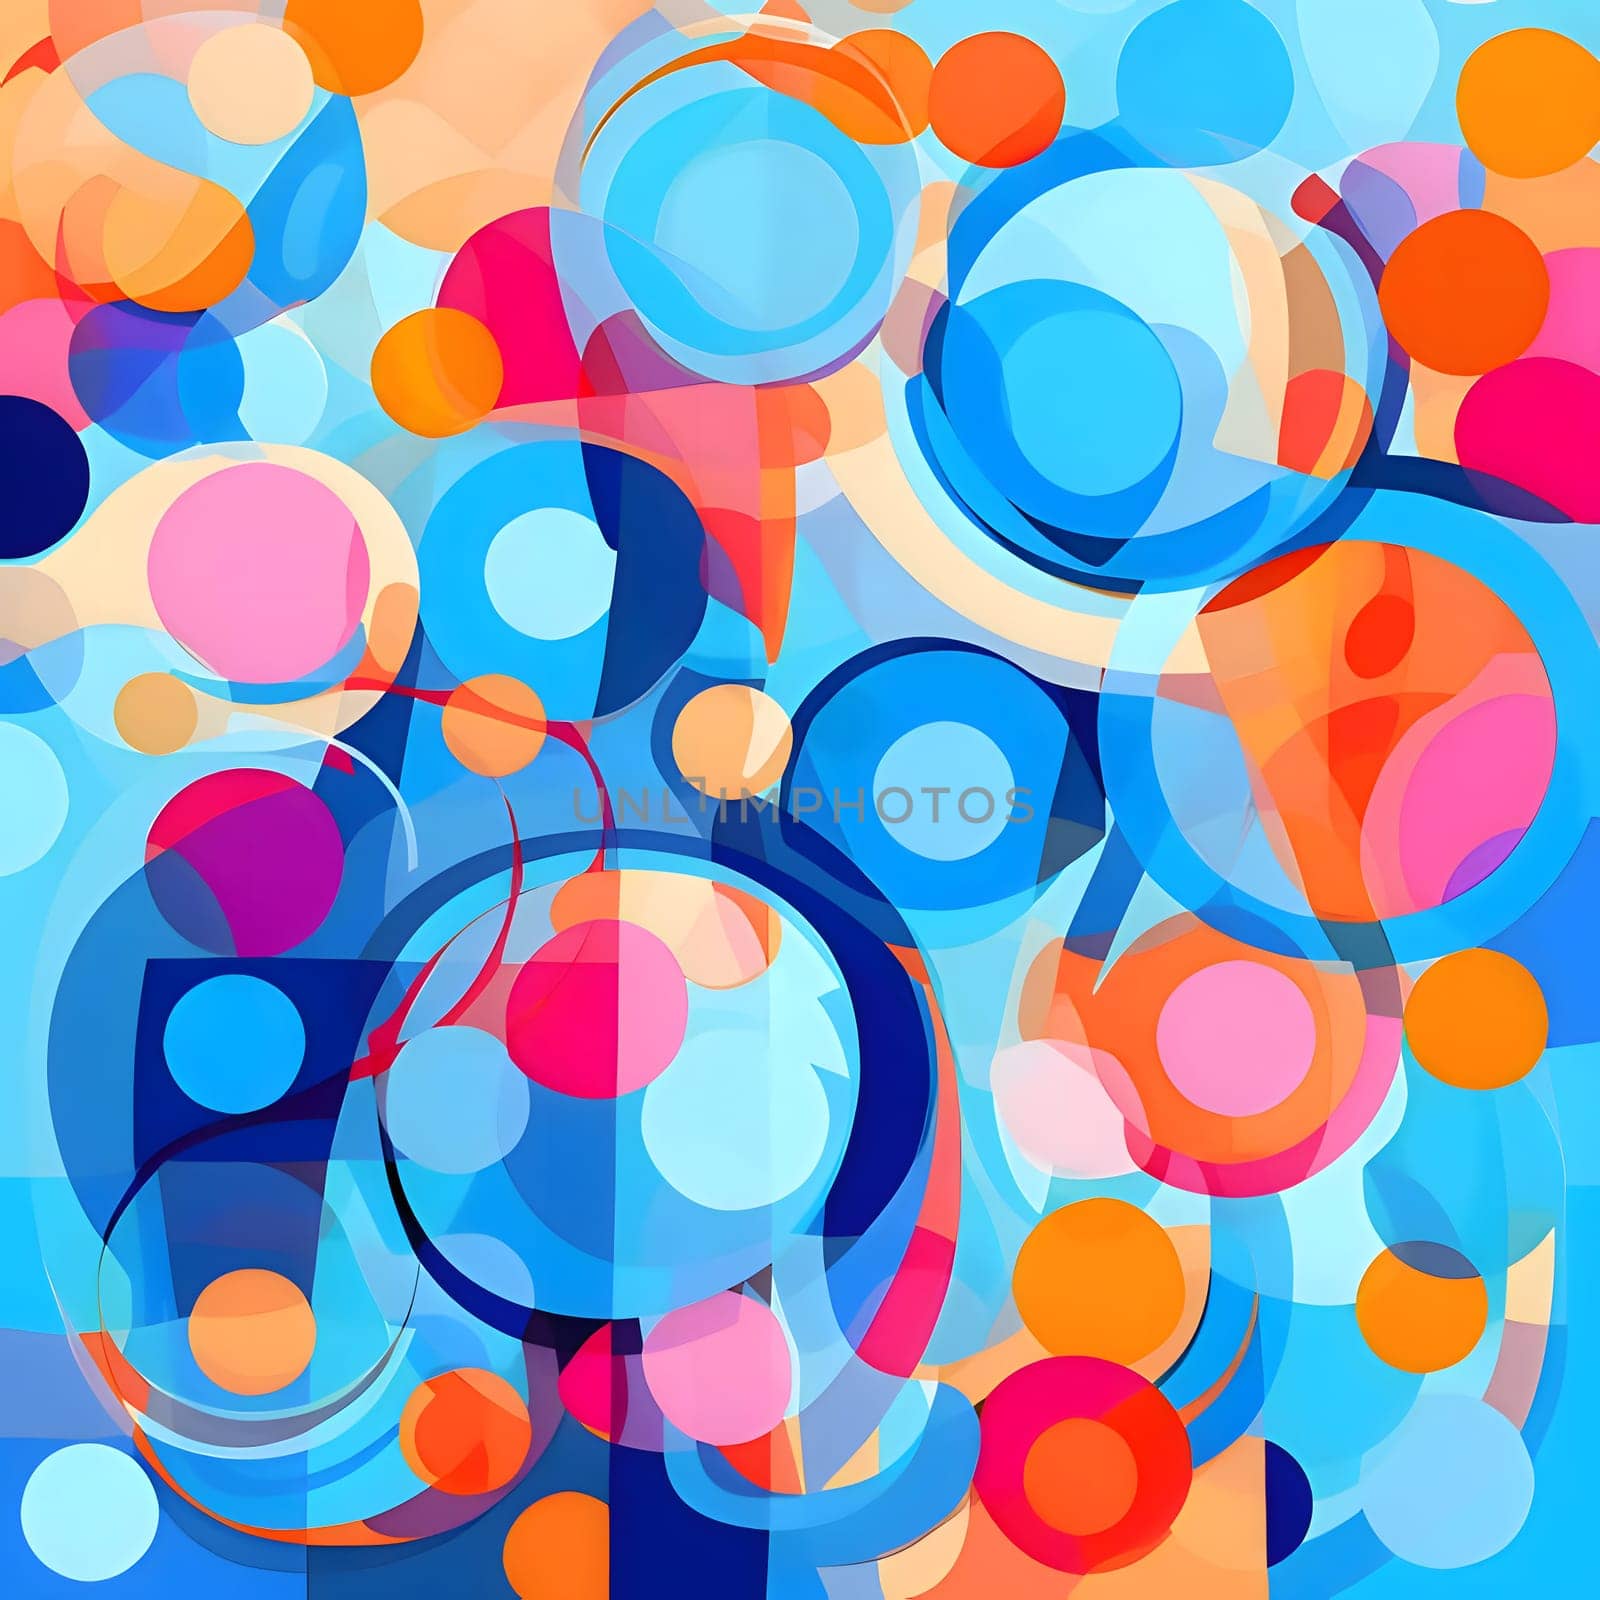 Patterns and banners backgrounds: Abstract colorful background with circles and dots. Vector illustration. Eps 10.